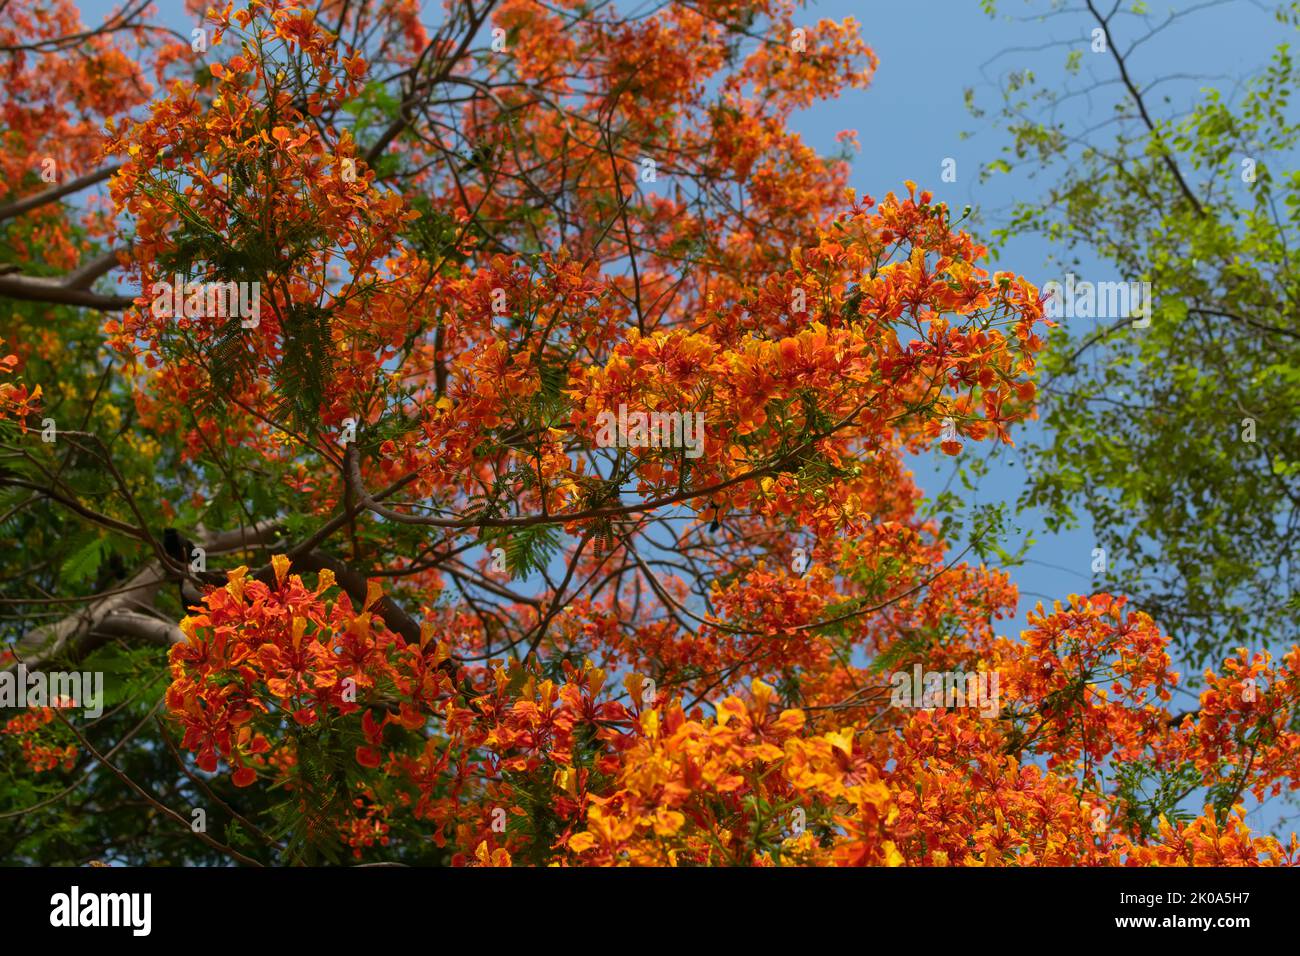 Colorful flowers of Gulmohar tree bloomed which covers the tree. This plant is also known as royal poinciana, Mayflower, flamboyant, peacock, flame tr Stock Photo